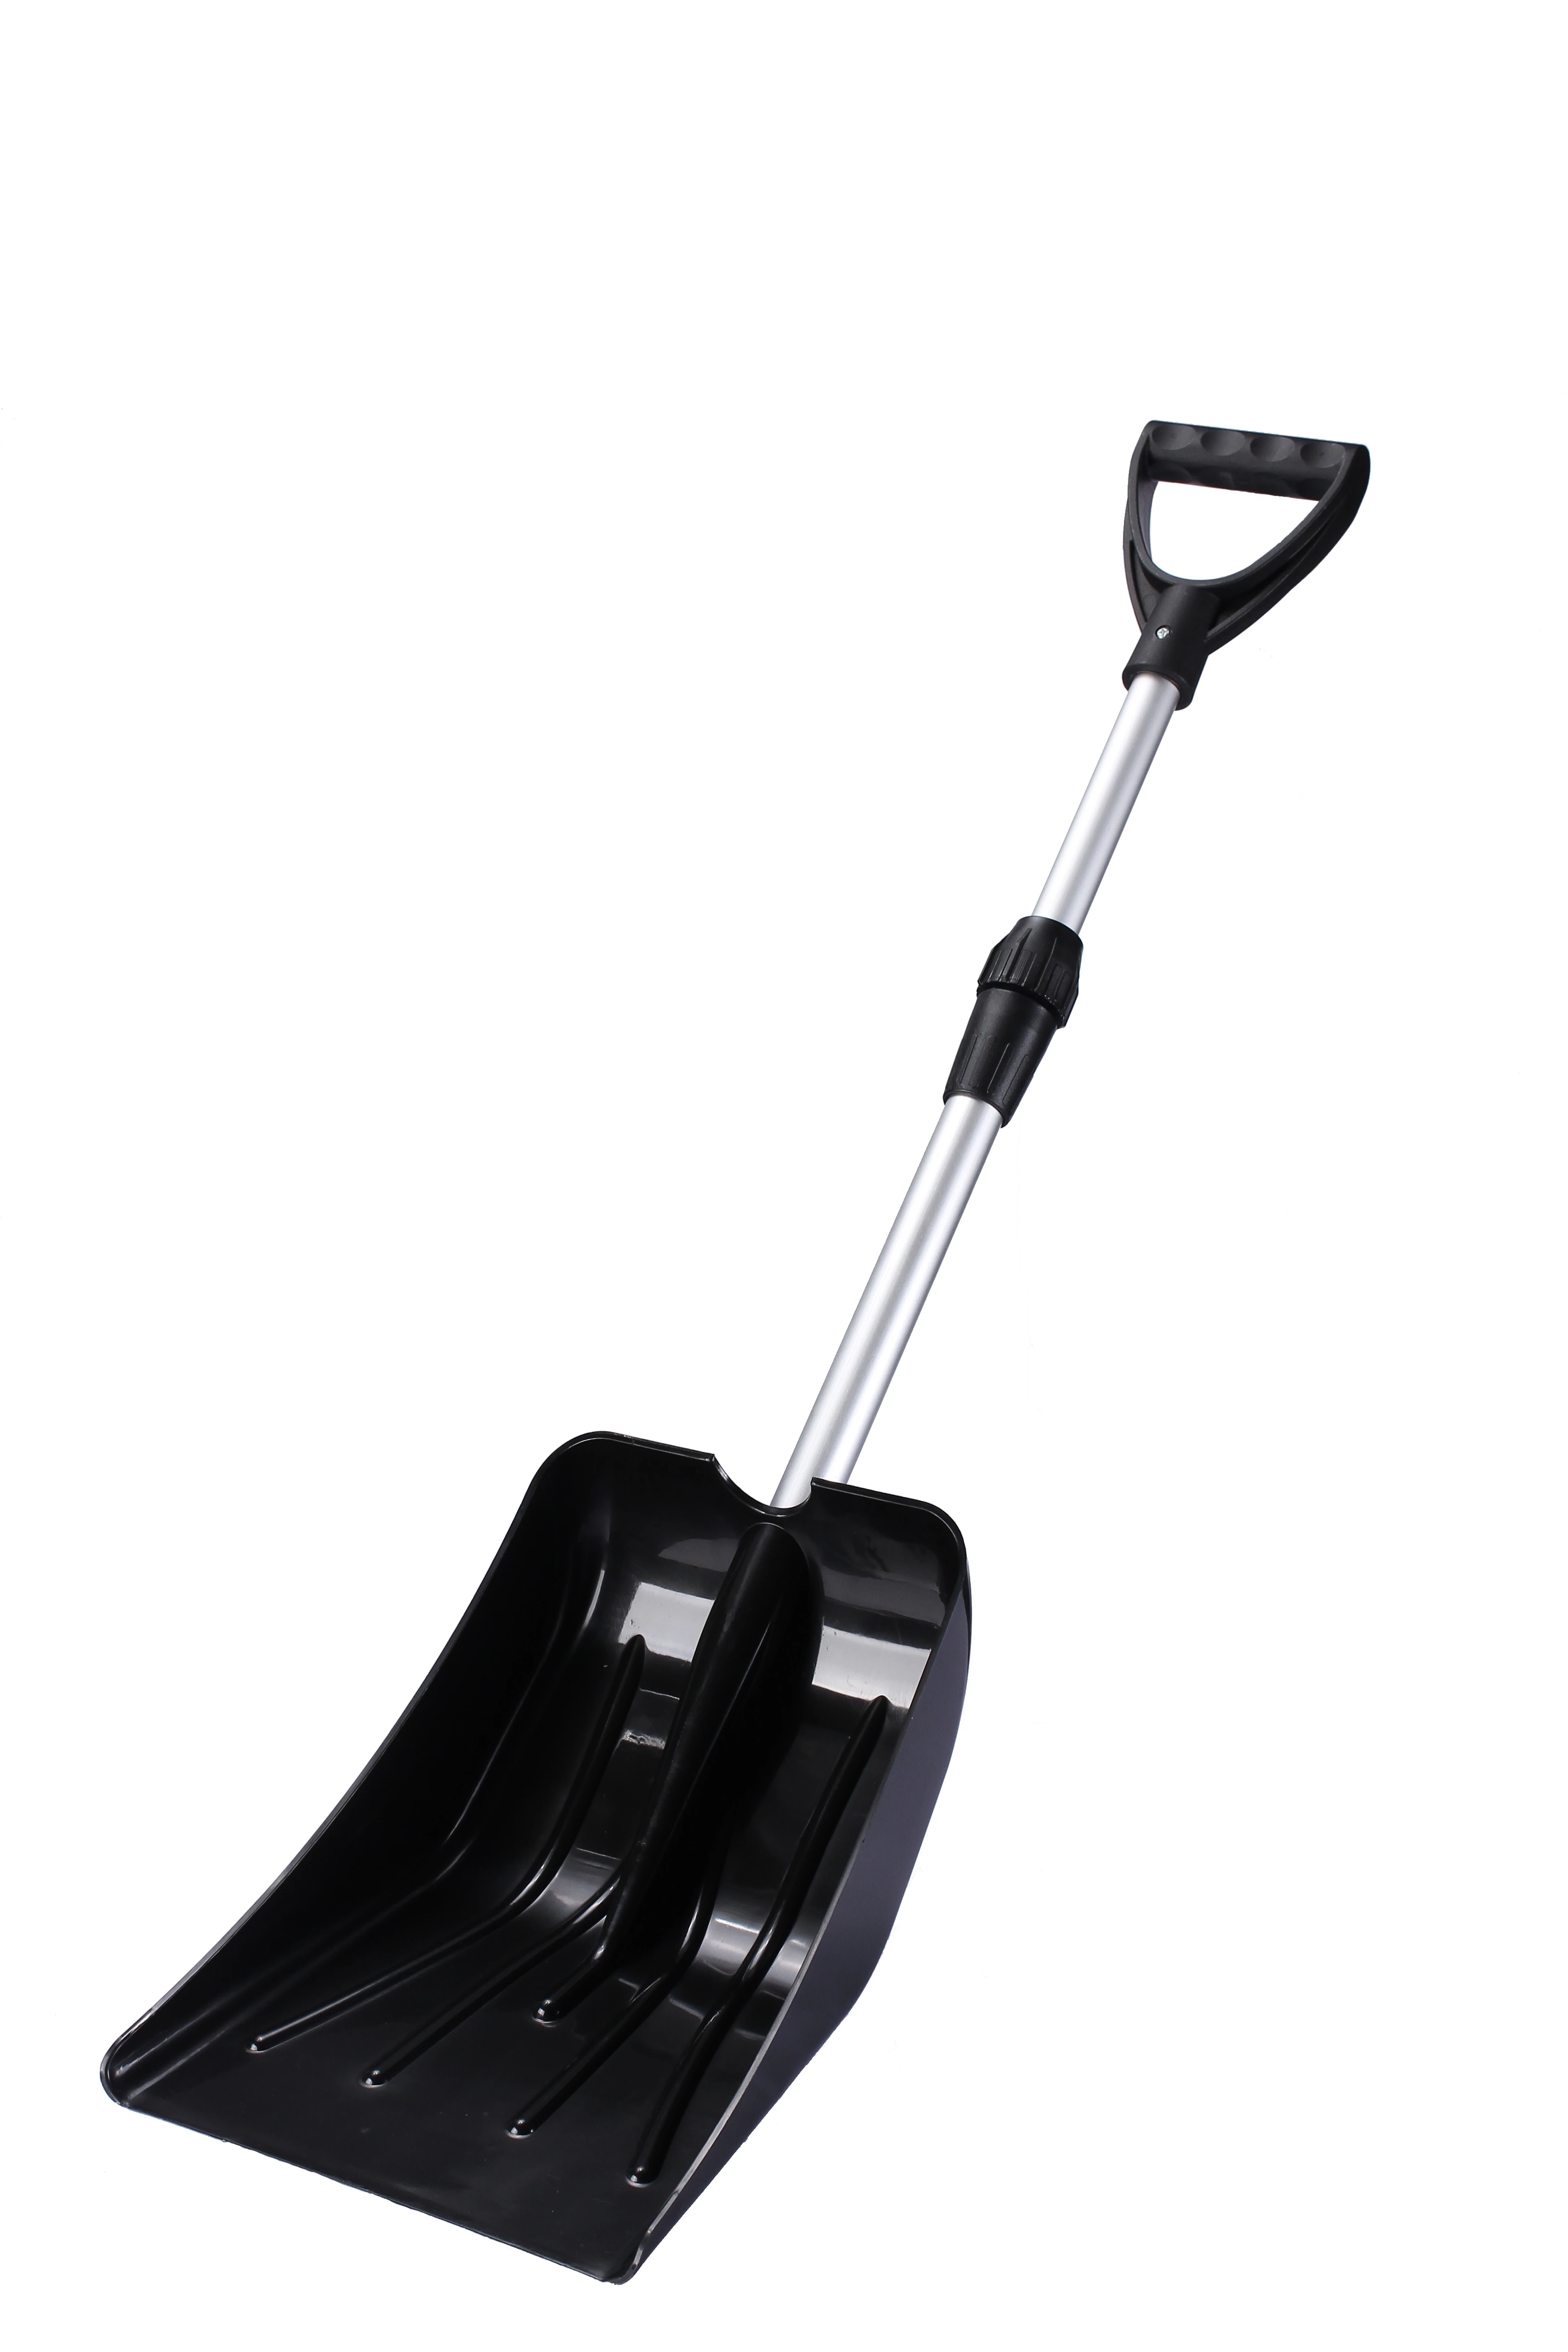 529 unbreakable stretch plastic snow shovel blade,light weight snow pusher for garden home